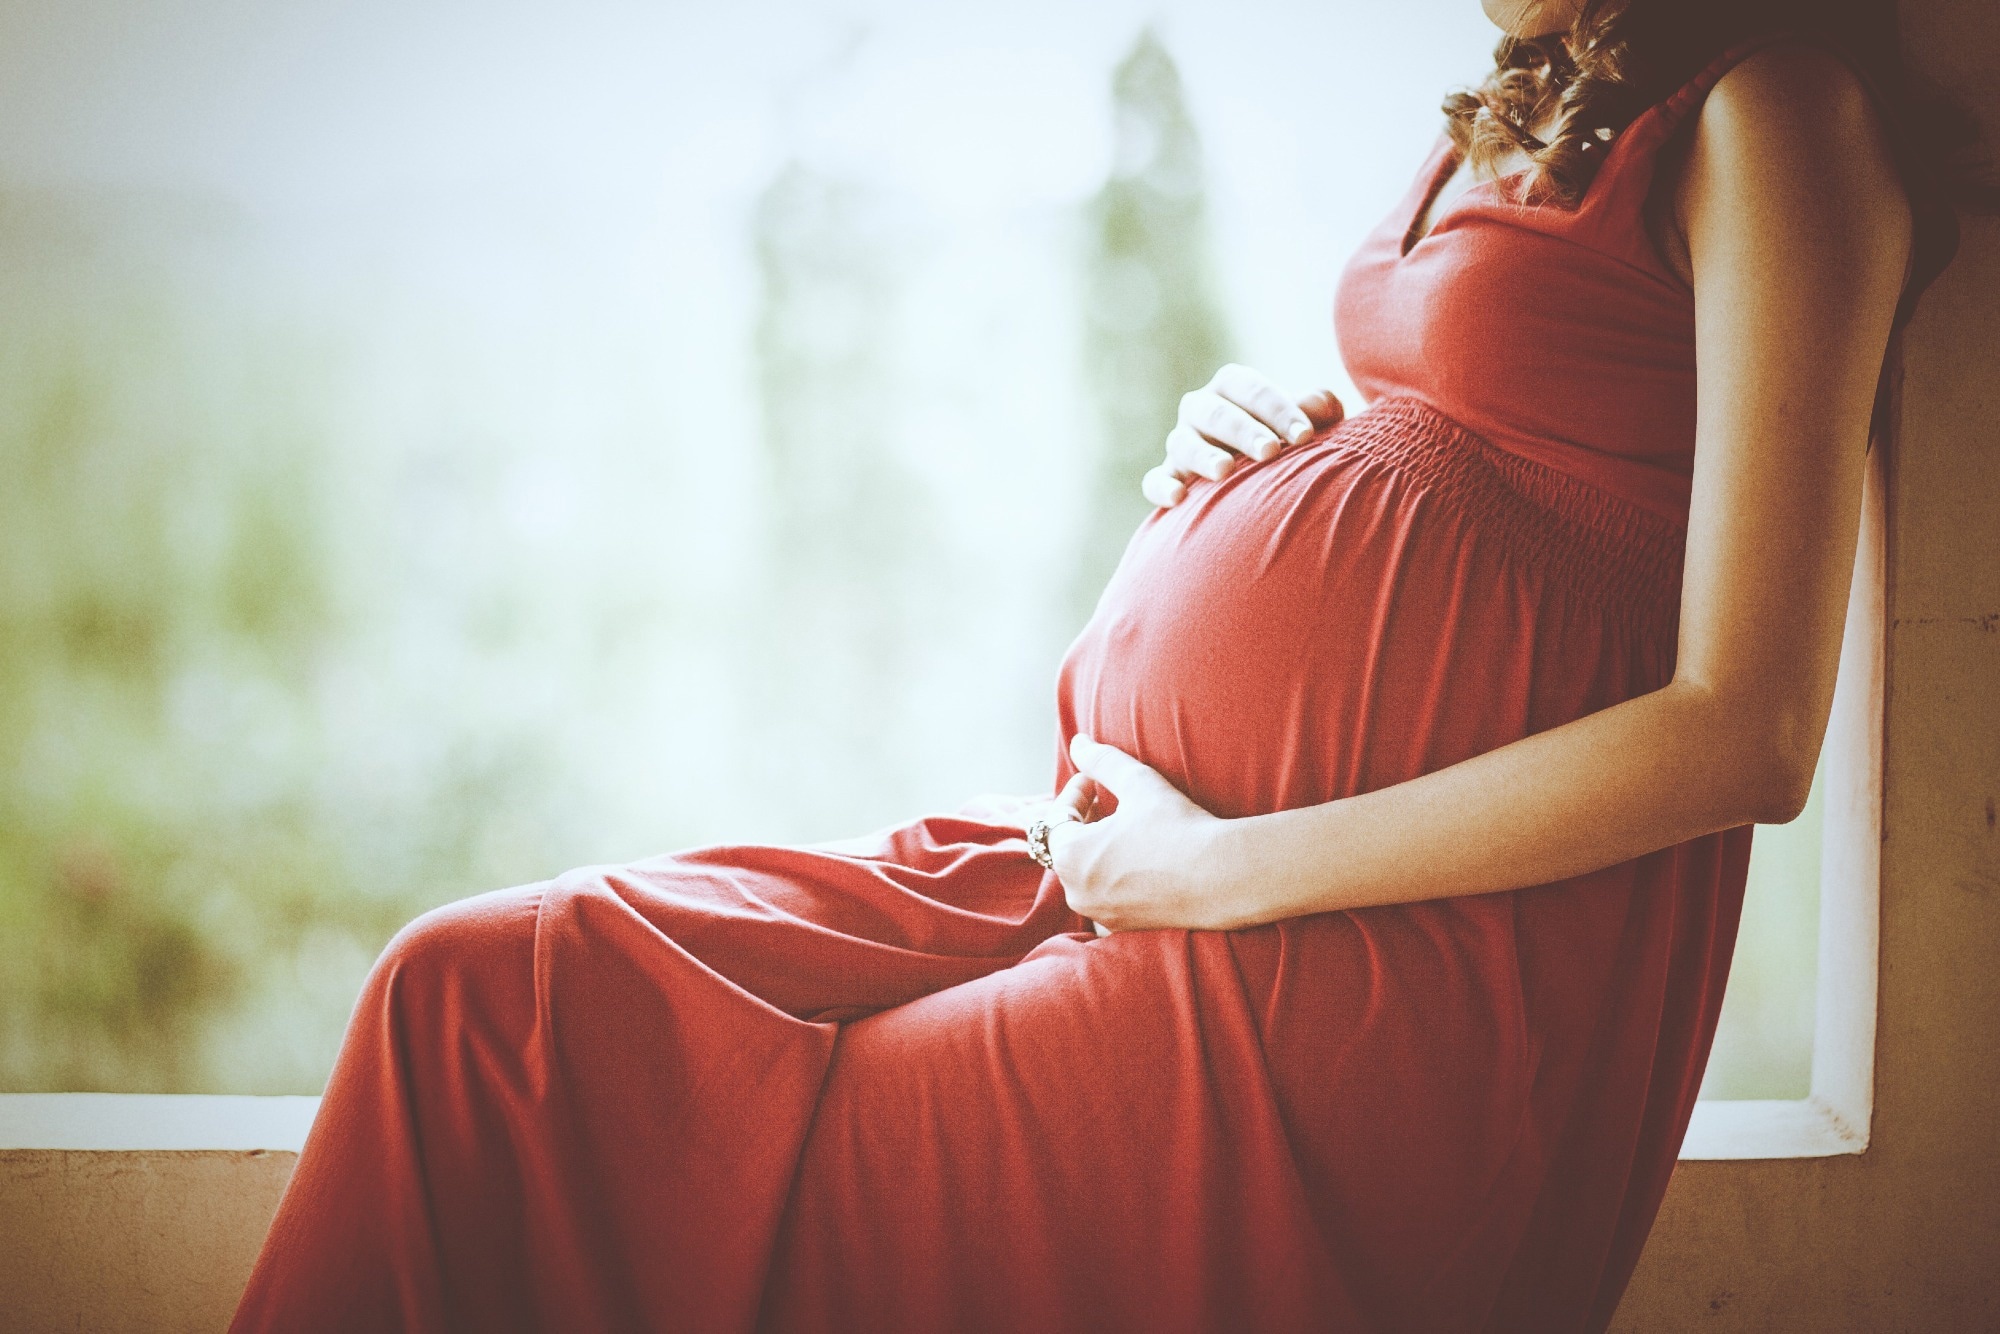 Study: Use of Leukotriene-Receptor Antagonists During Pregnancy and Risk of Neuropsychiatric Events in Offspring. Image Credit: 10 FACE/Shutterstock